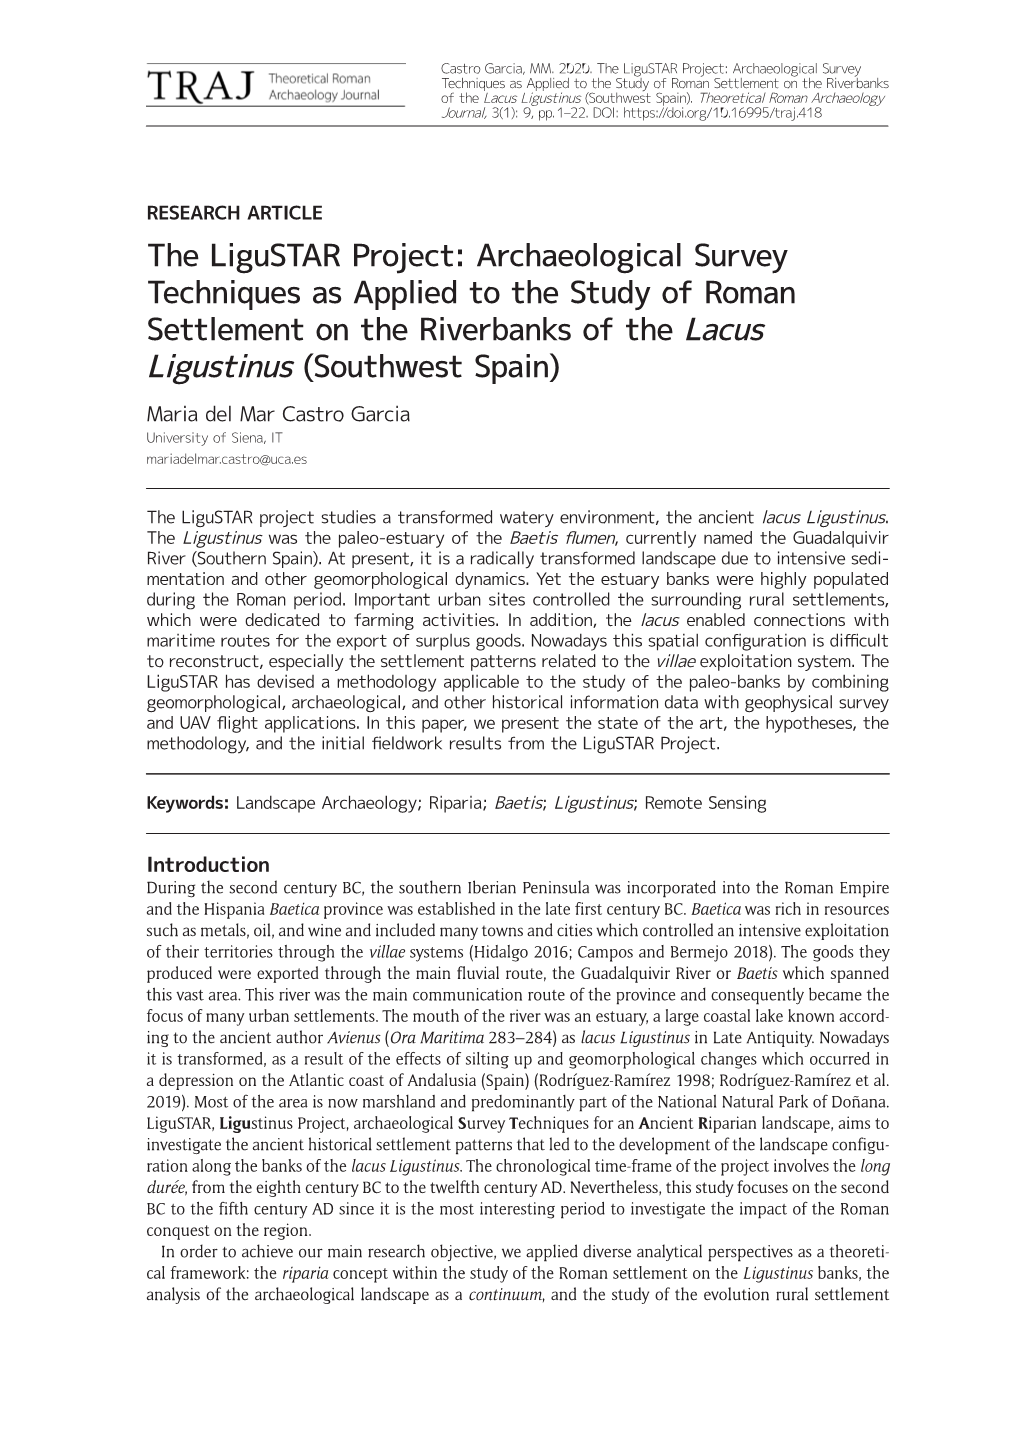 Archaeological Survey Techniques As Applied to the Study of Roman Settlement on the Riverbanks of the Lacus Ligustinus (Southwest Spain)